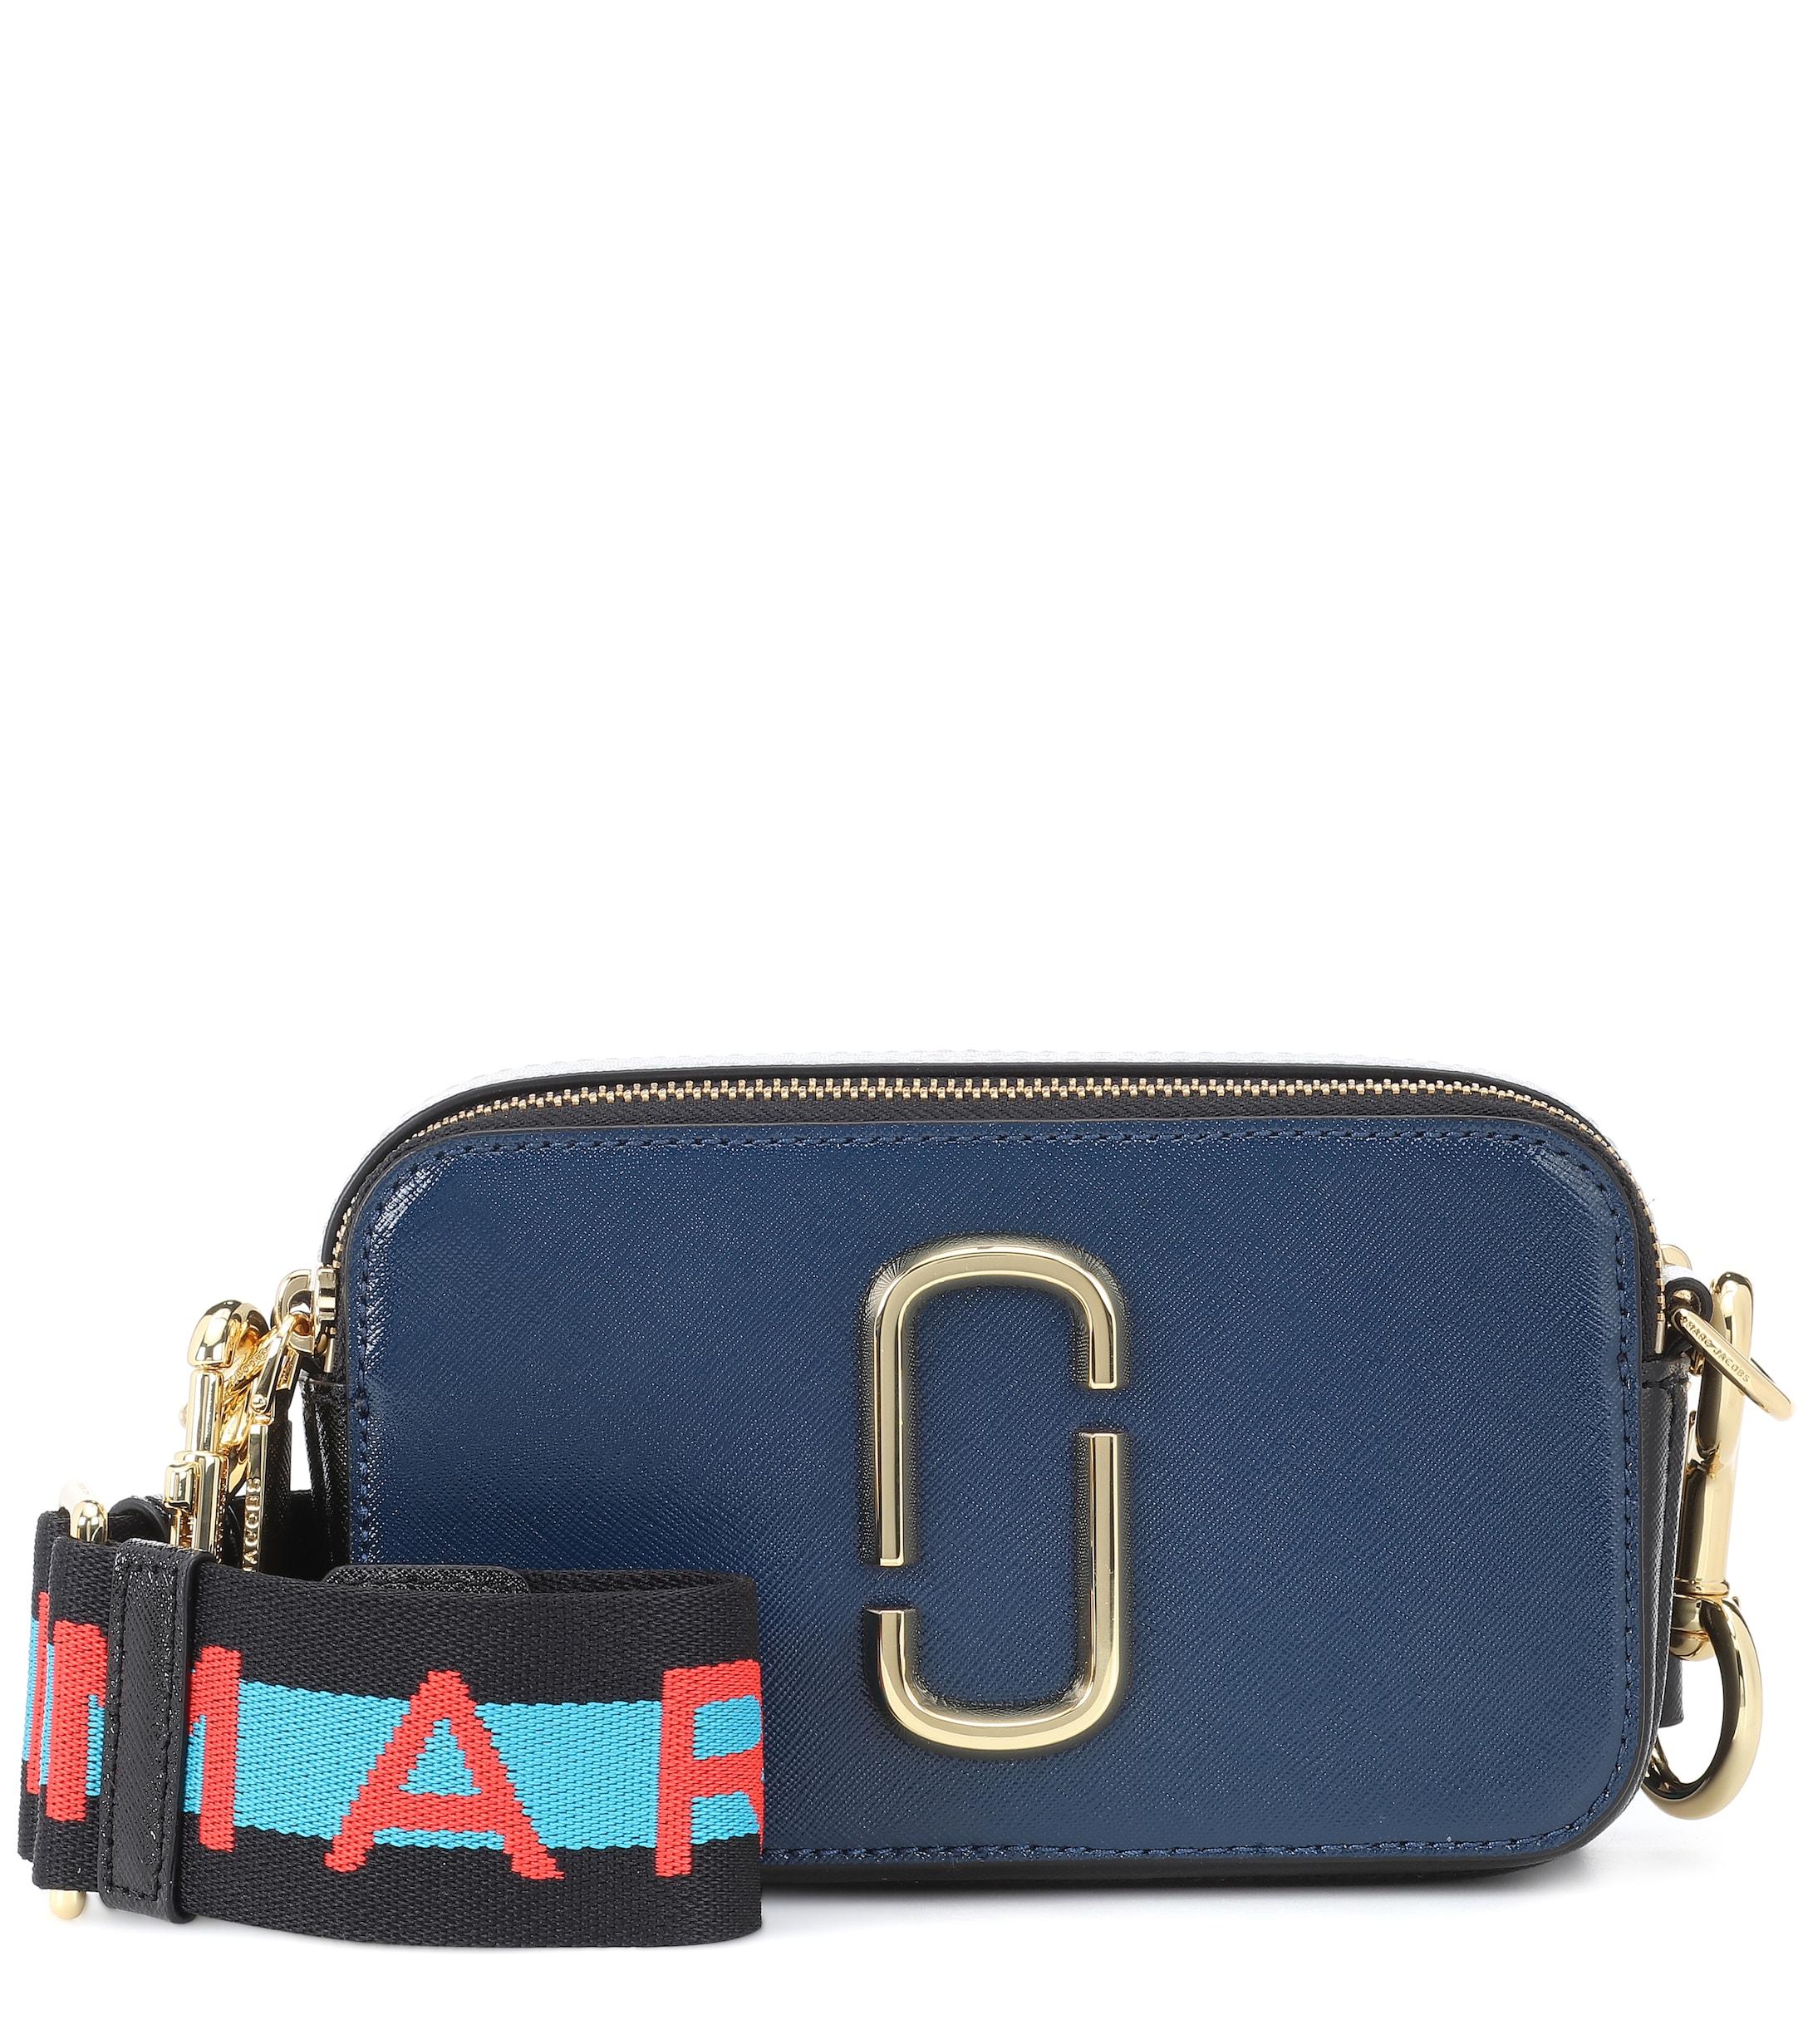 Marc Jacobs Snapshot Small Leather Crossbody Bag in Blue - Save 34% - Lyst